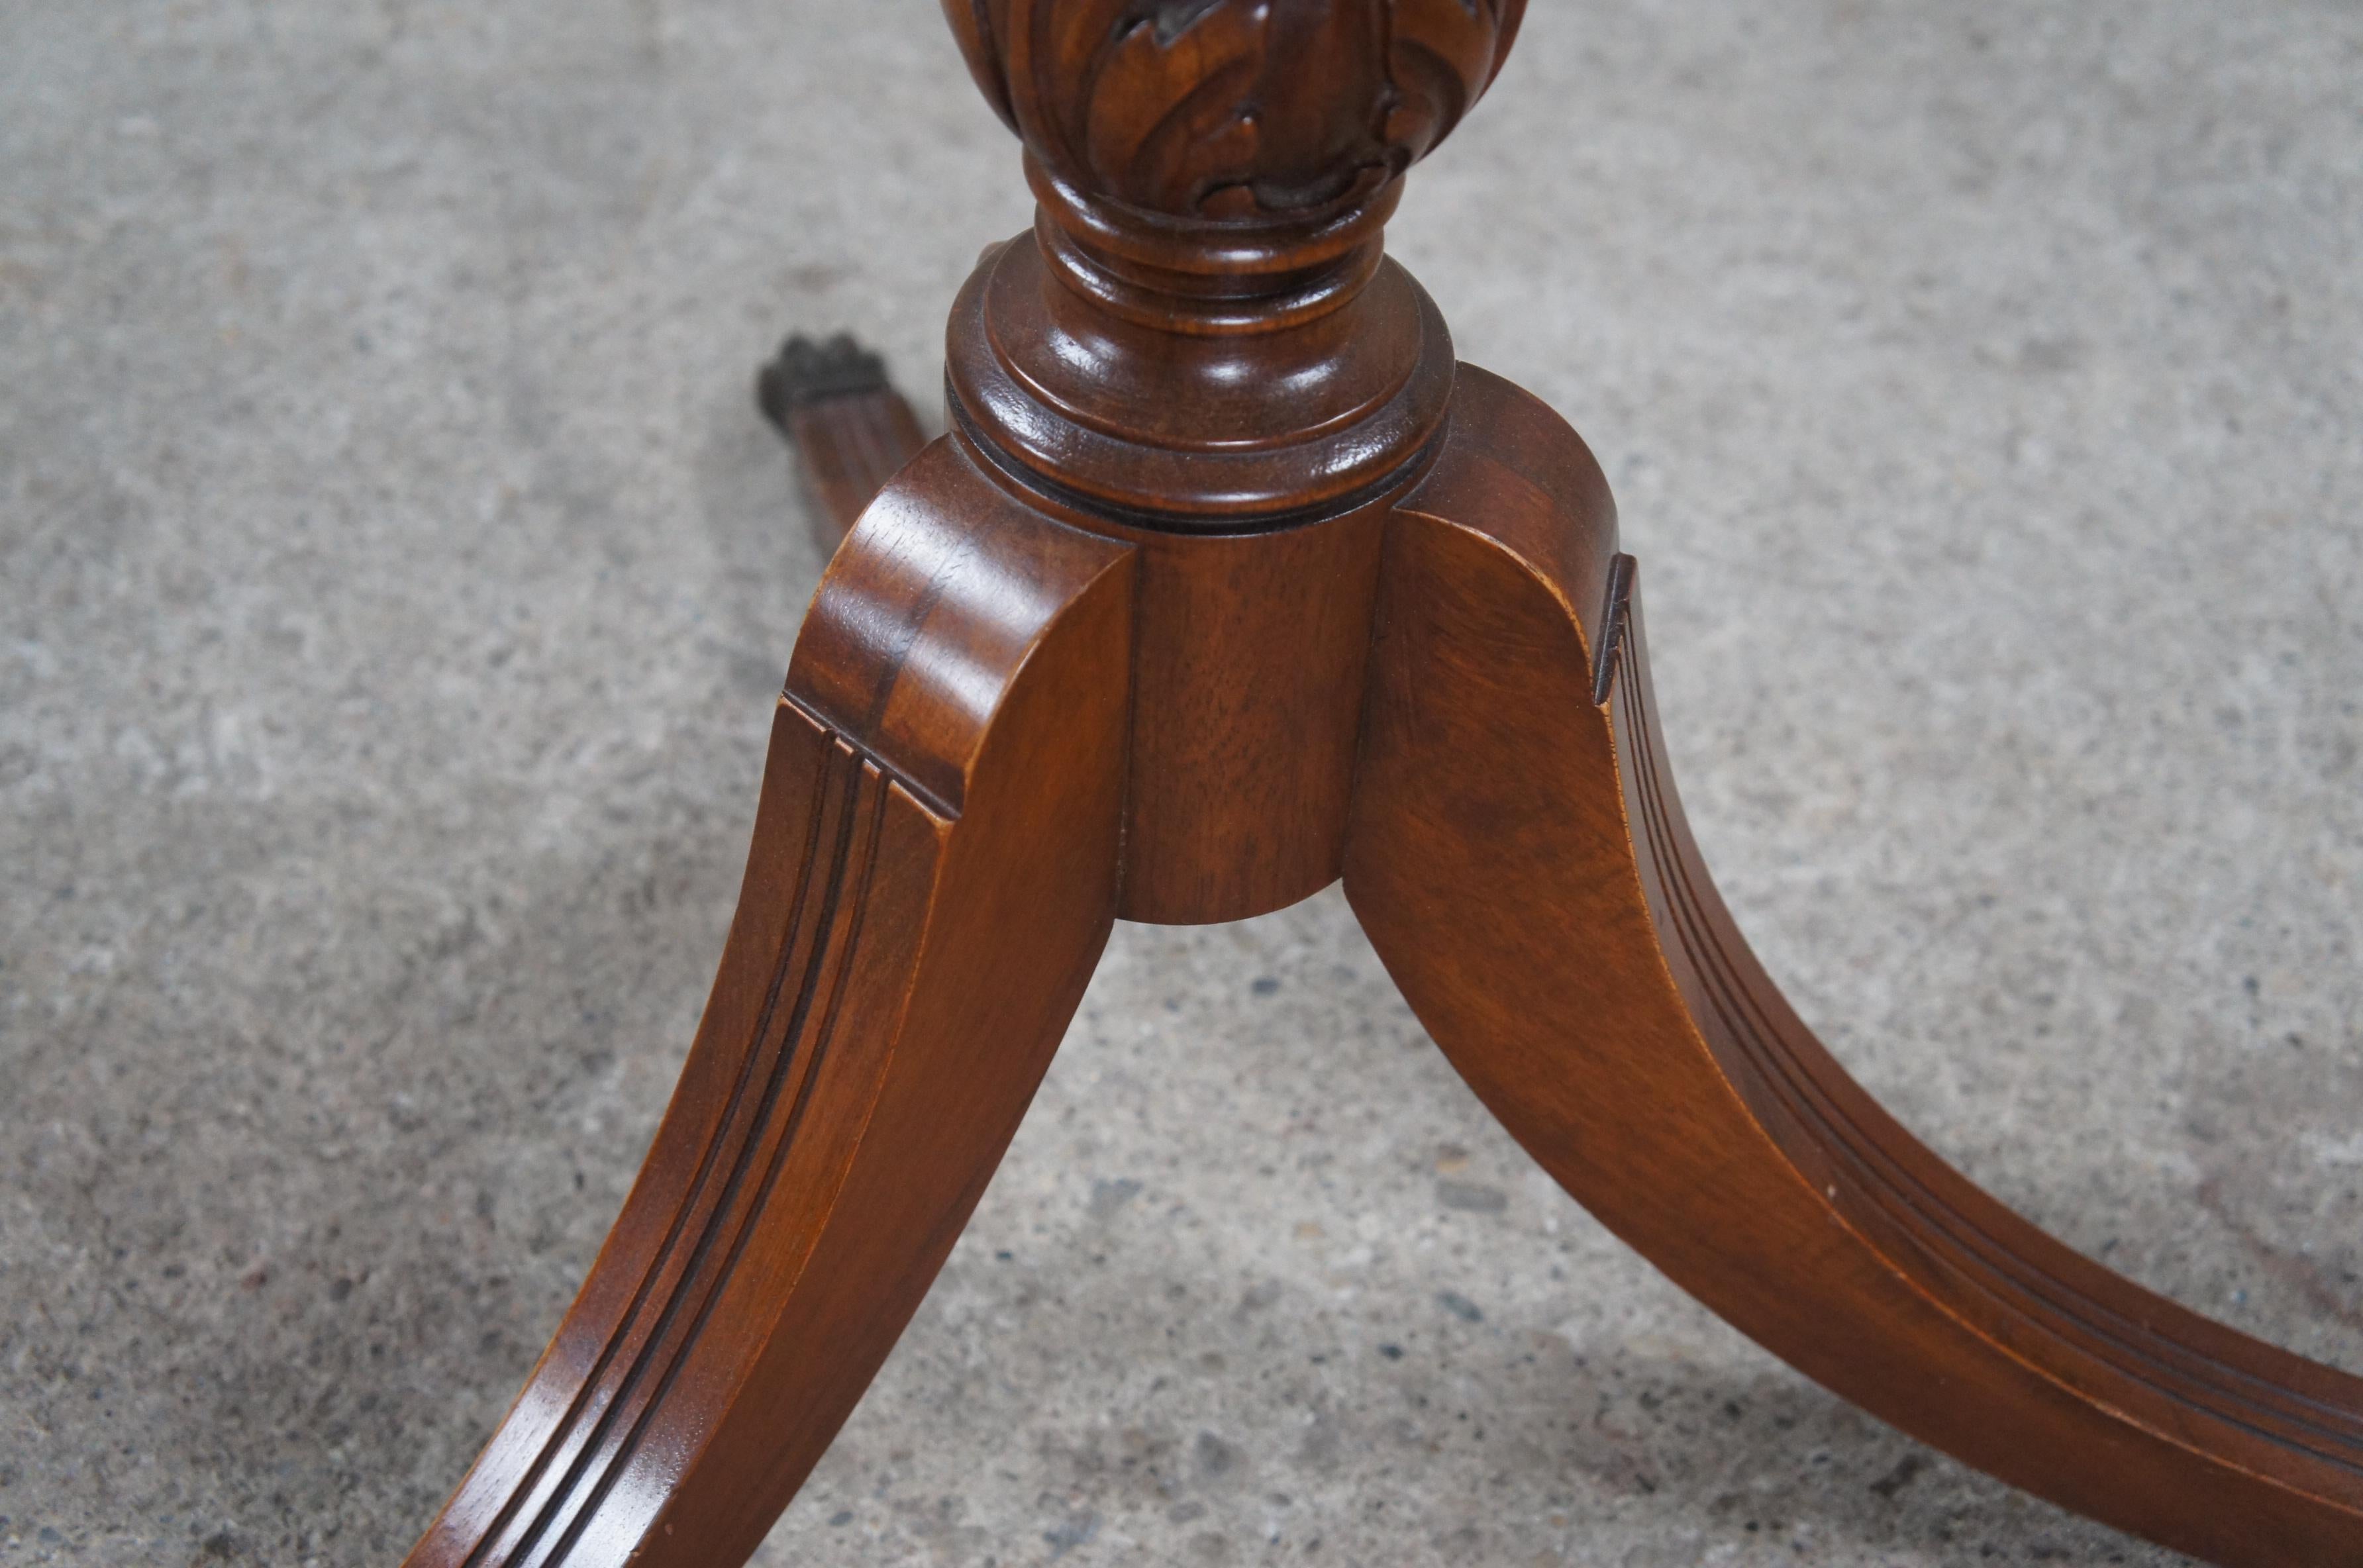 Antique Imperial Furniture Duncan Phyfe Mahogany Pie Crust Pedestal Table Stand 4